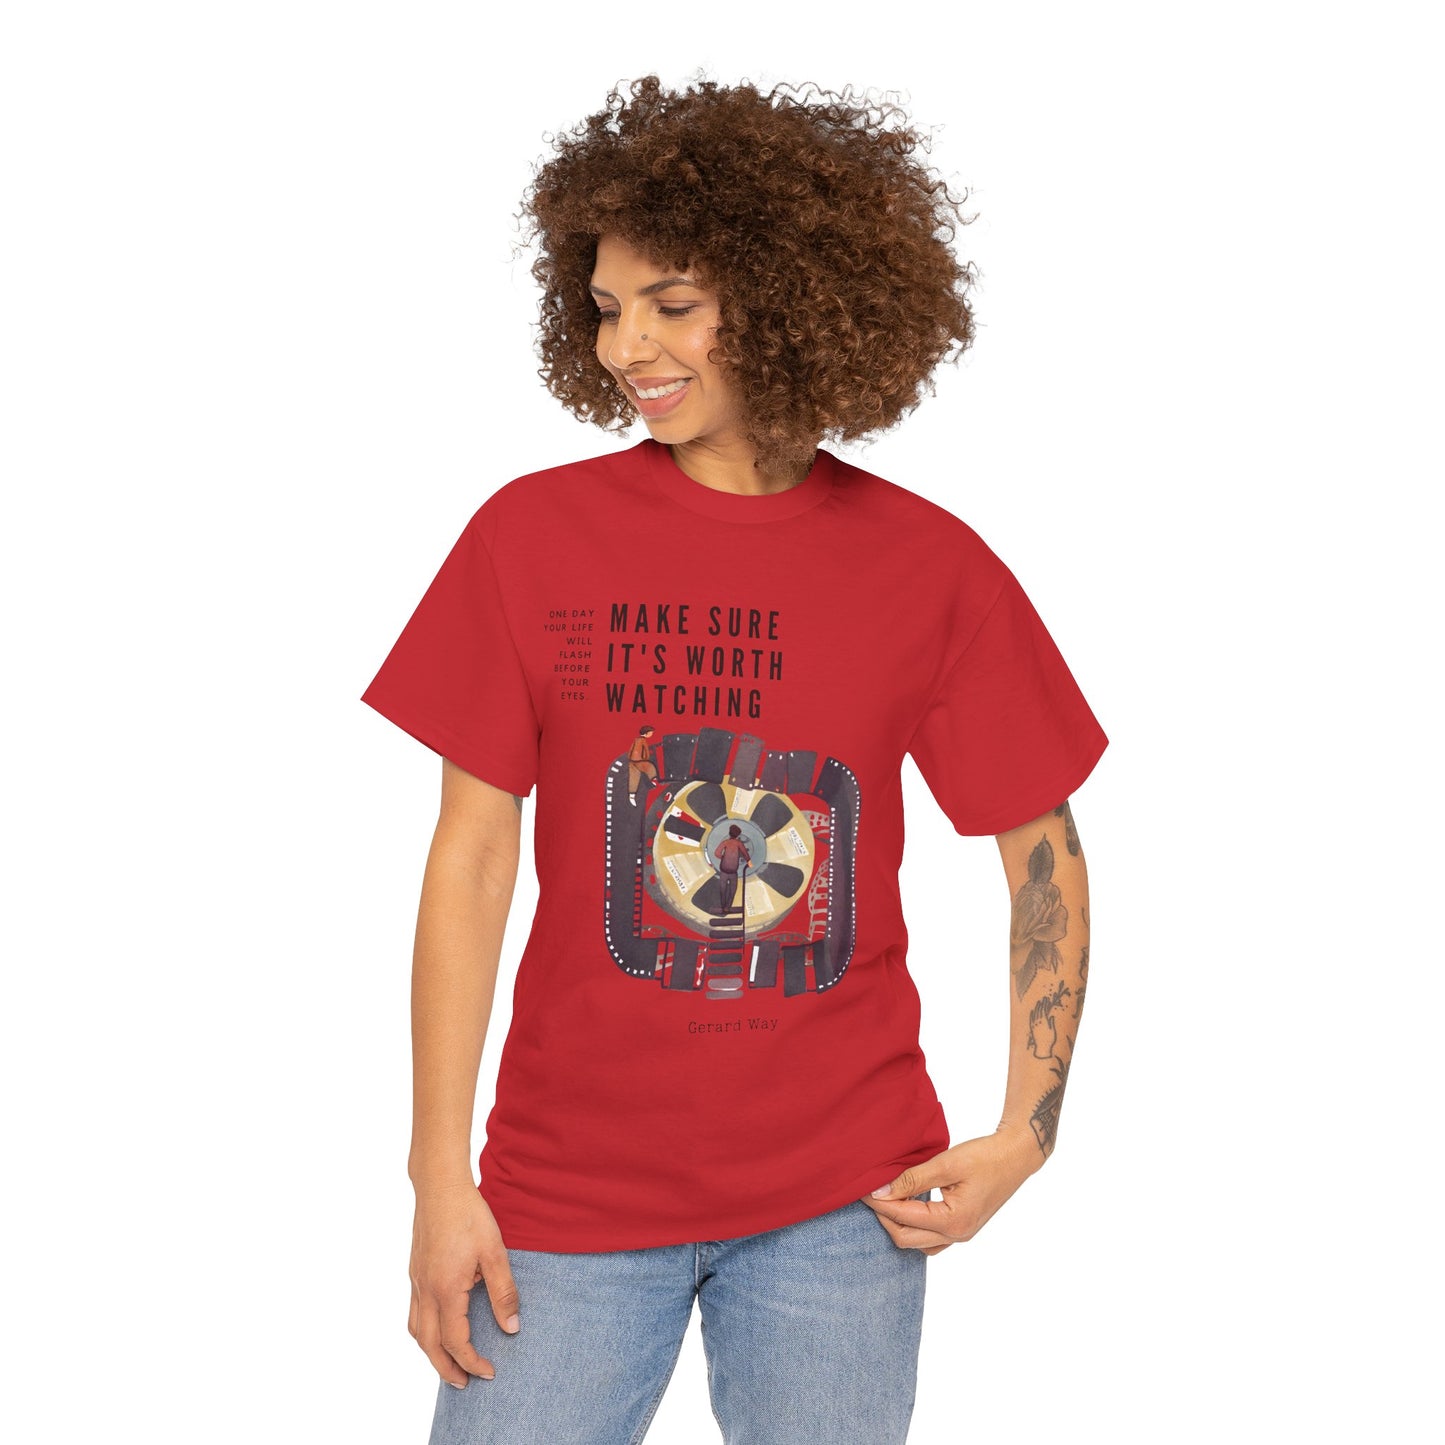 The Live Boldly T-Shirt: Make Your Story Epic"One day your life will flash..." Gerard Way